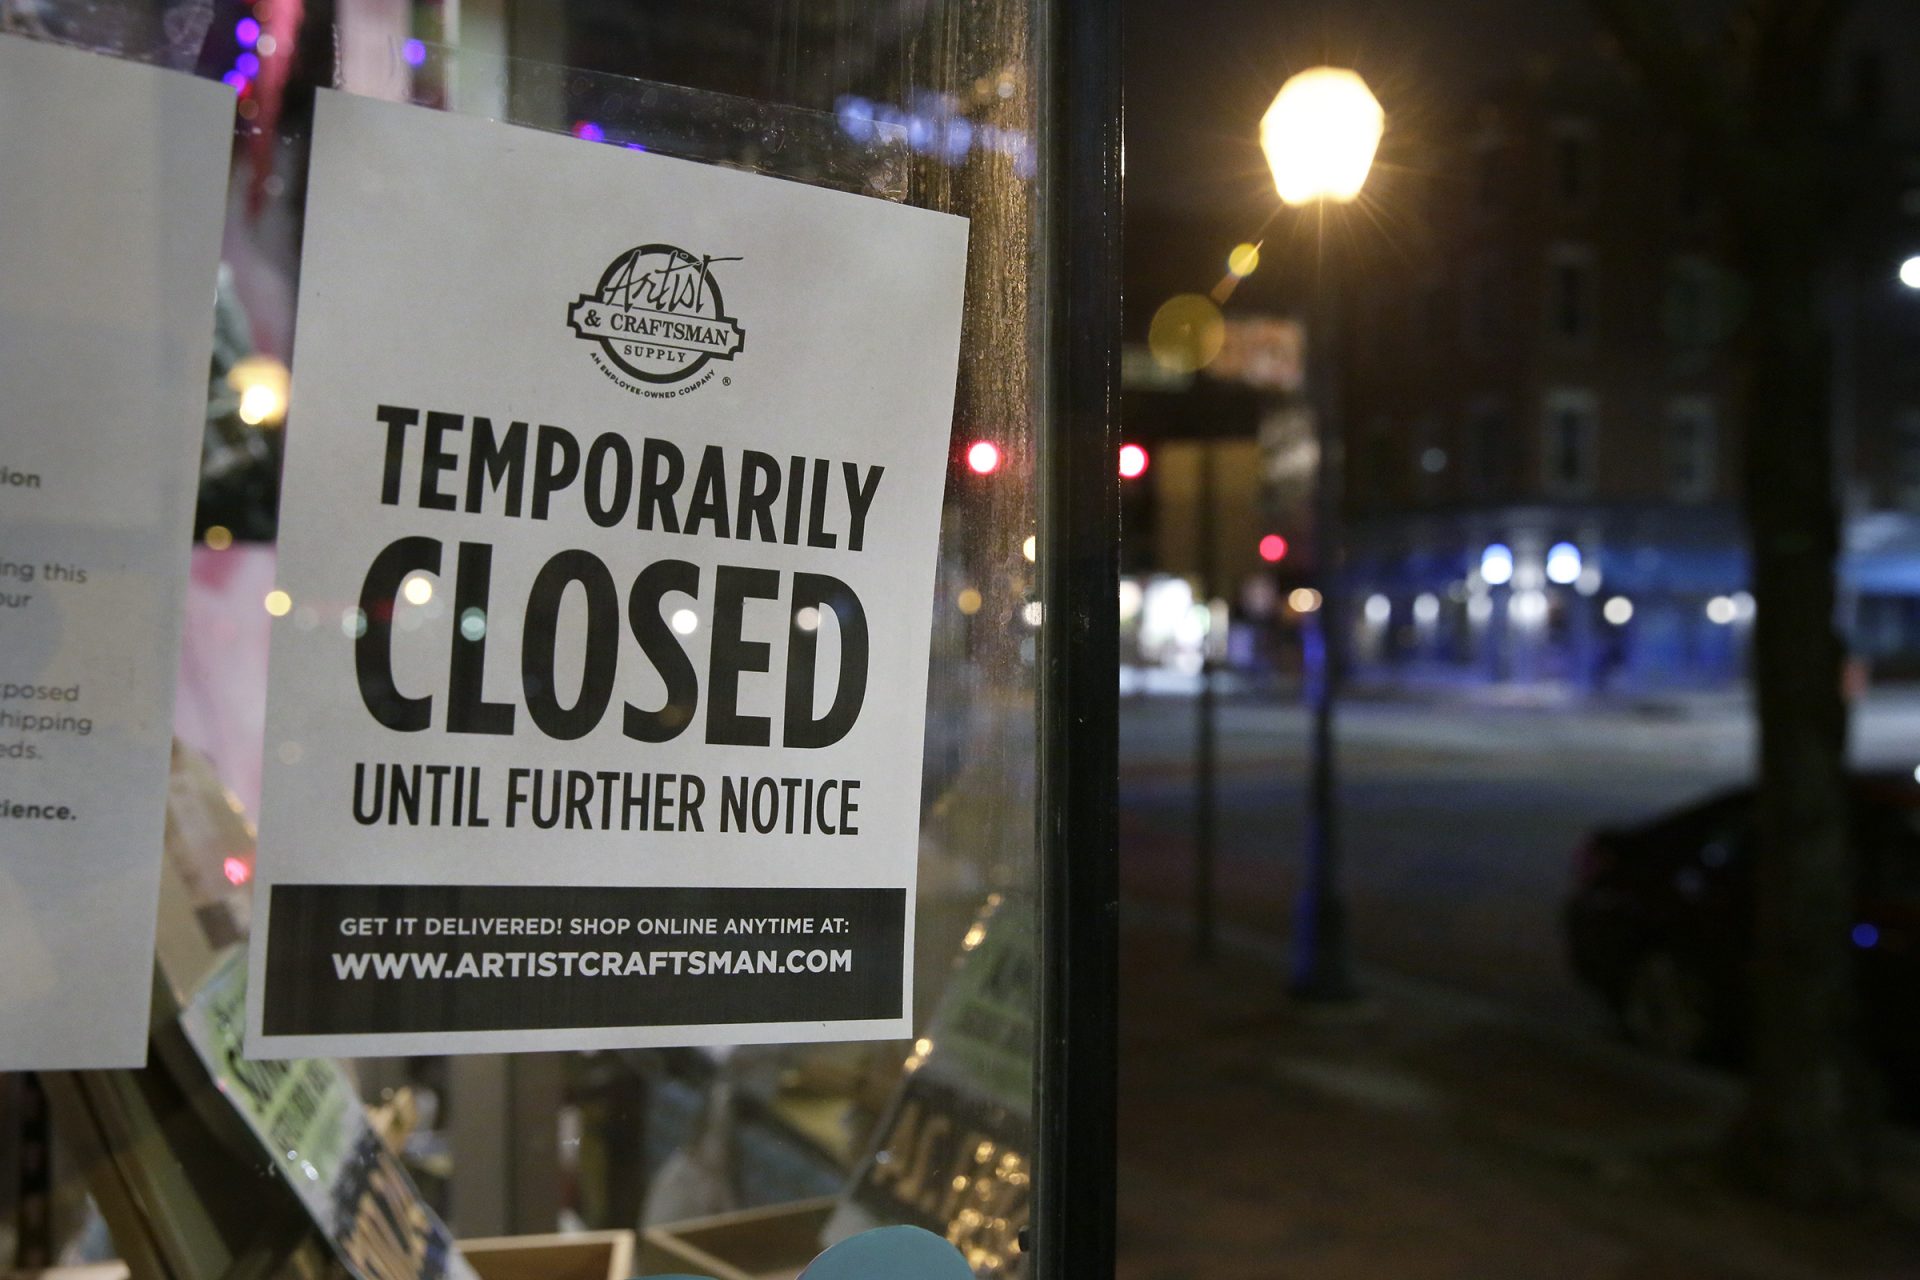 At 8:30 pm the 300 block of Market St. in Phila. is deserted and a sign in the window of the Artist and Craftsman Supply alerts folks that they are closed until further notice on March 19, 2020. The coronavirus has been spreading across the globe since January, and now has been identified in the Philadelphia region.

ELIZABETH ROBERTSON / Philadelphia Inquirer